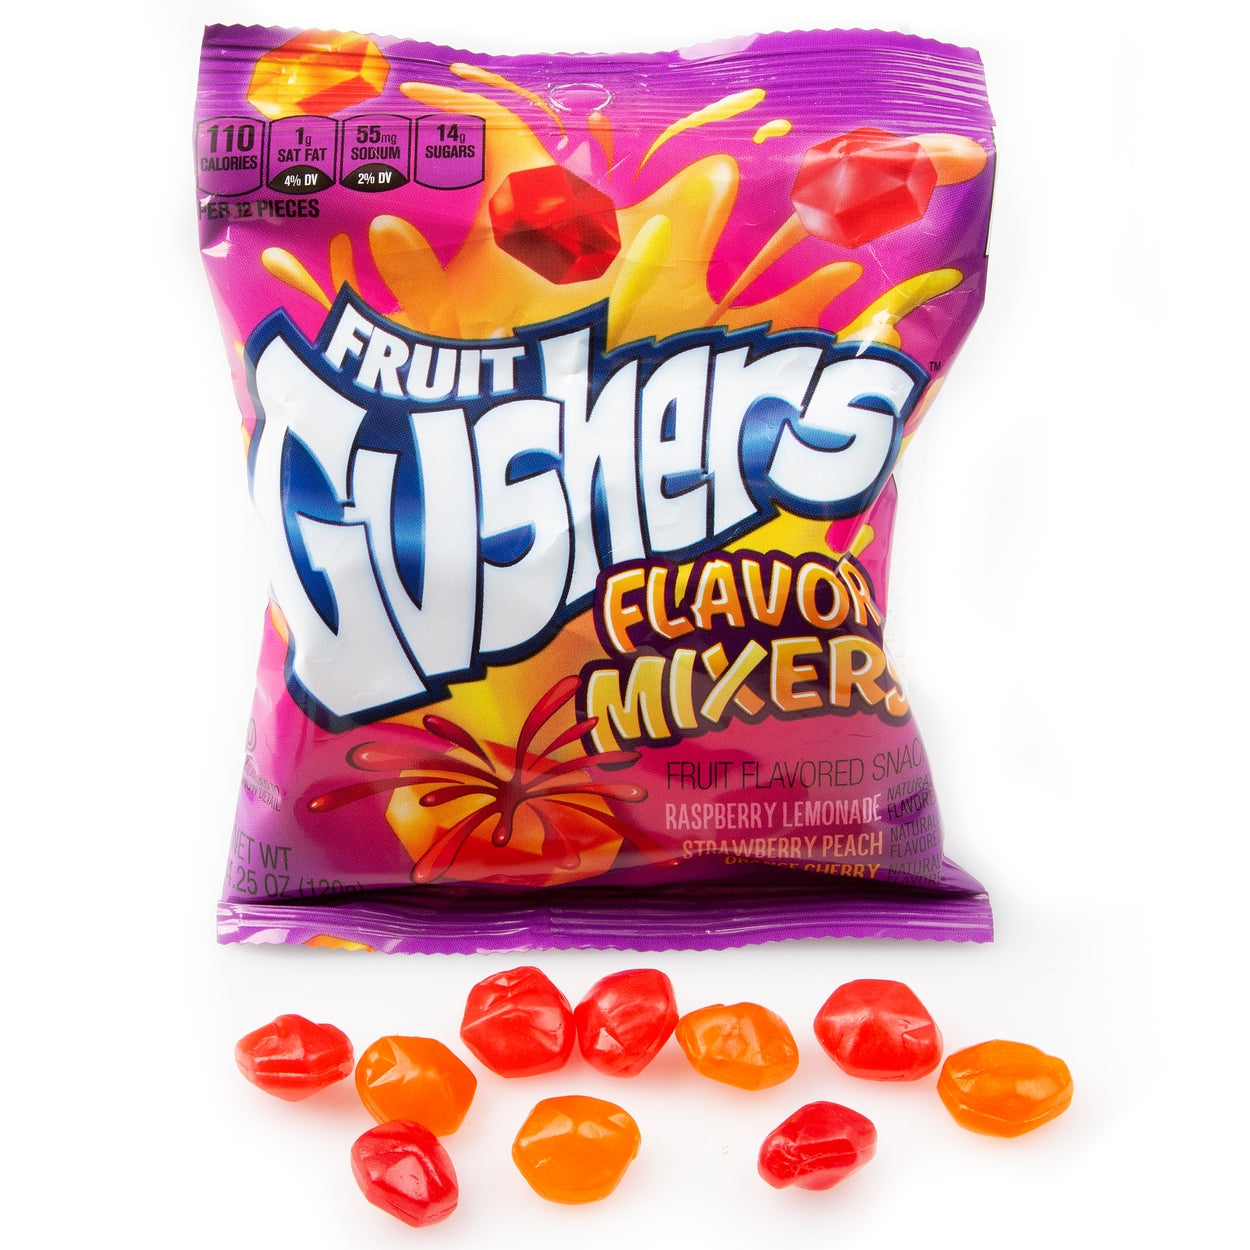 Chamoy Gushers (Flavor Mixer)